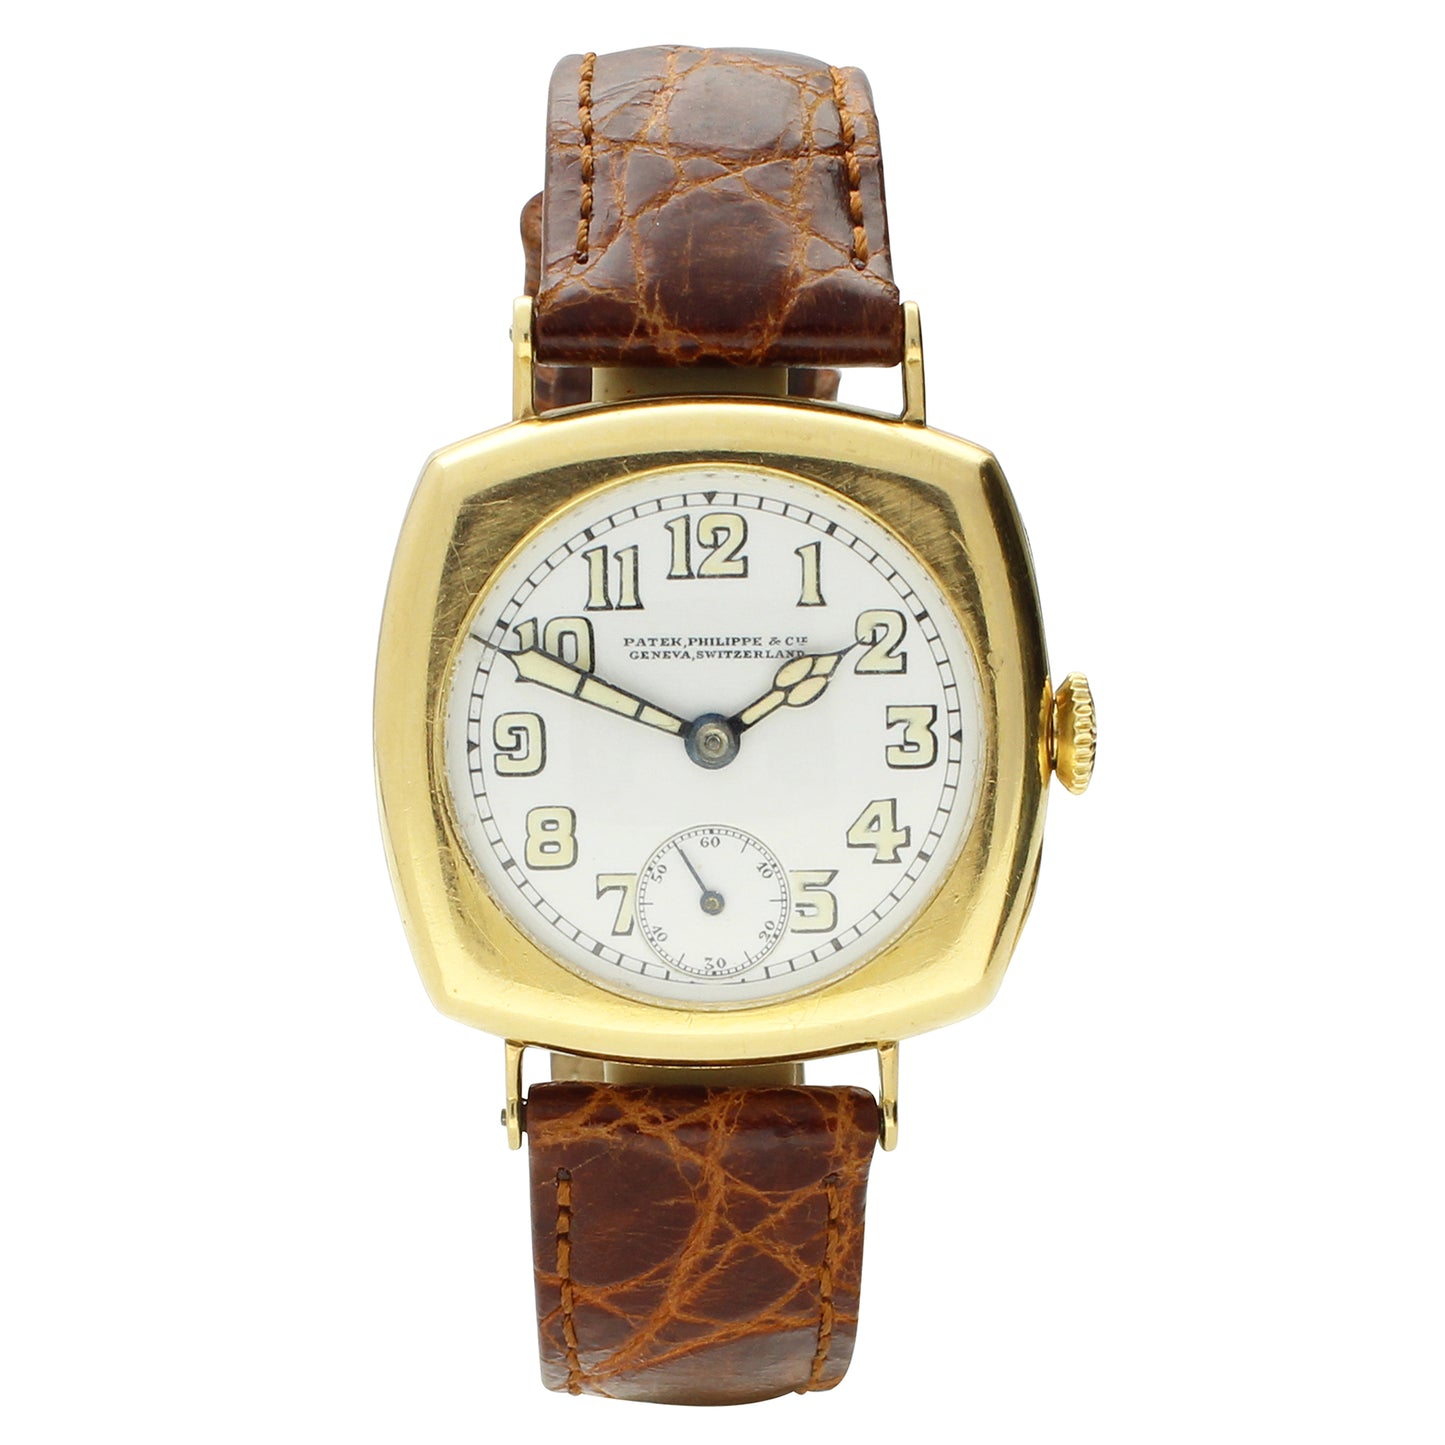 18ct yellow gold cushion cased wristwatch with enamel dial, retailed by Shreve & Co. San Francisco. Made 1920